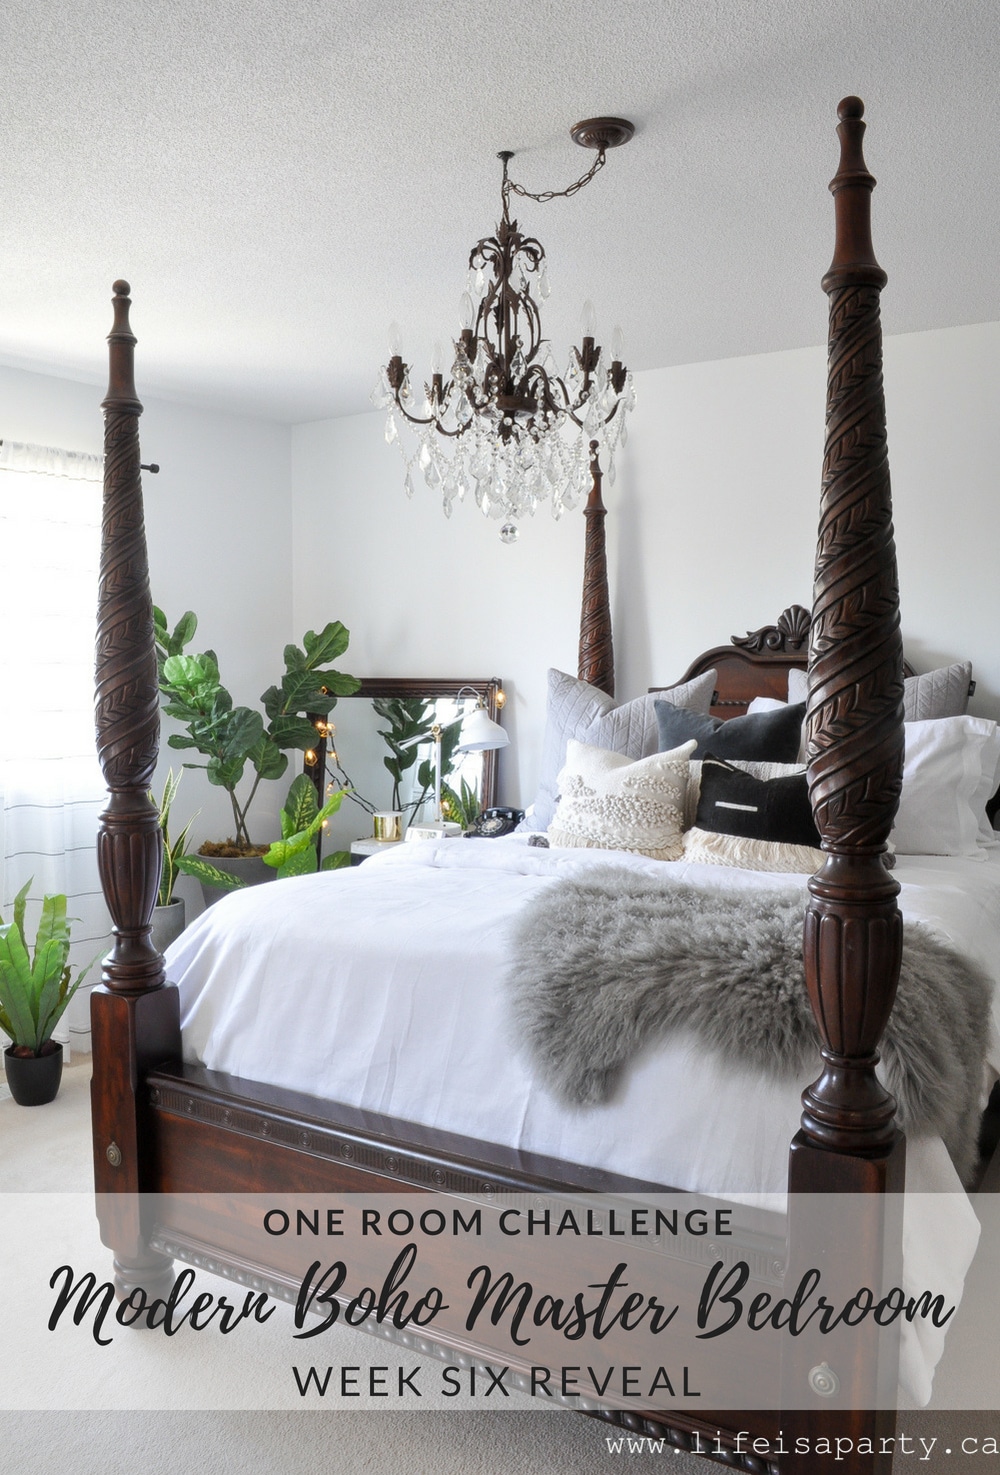 Modern Bobo Master Bedroom: Black and white, lots of texture, and a mix of modern and traditional help give this room a European Modern Boho feel.